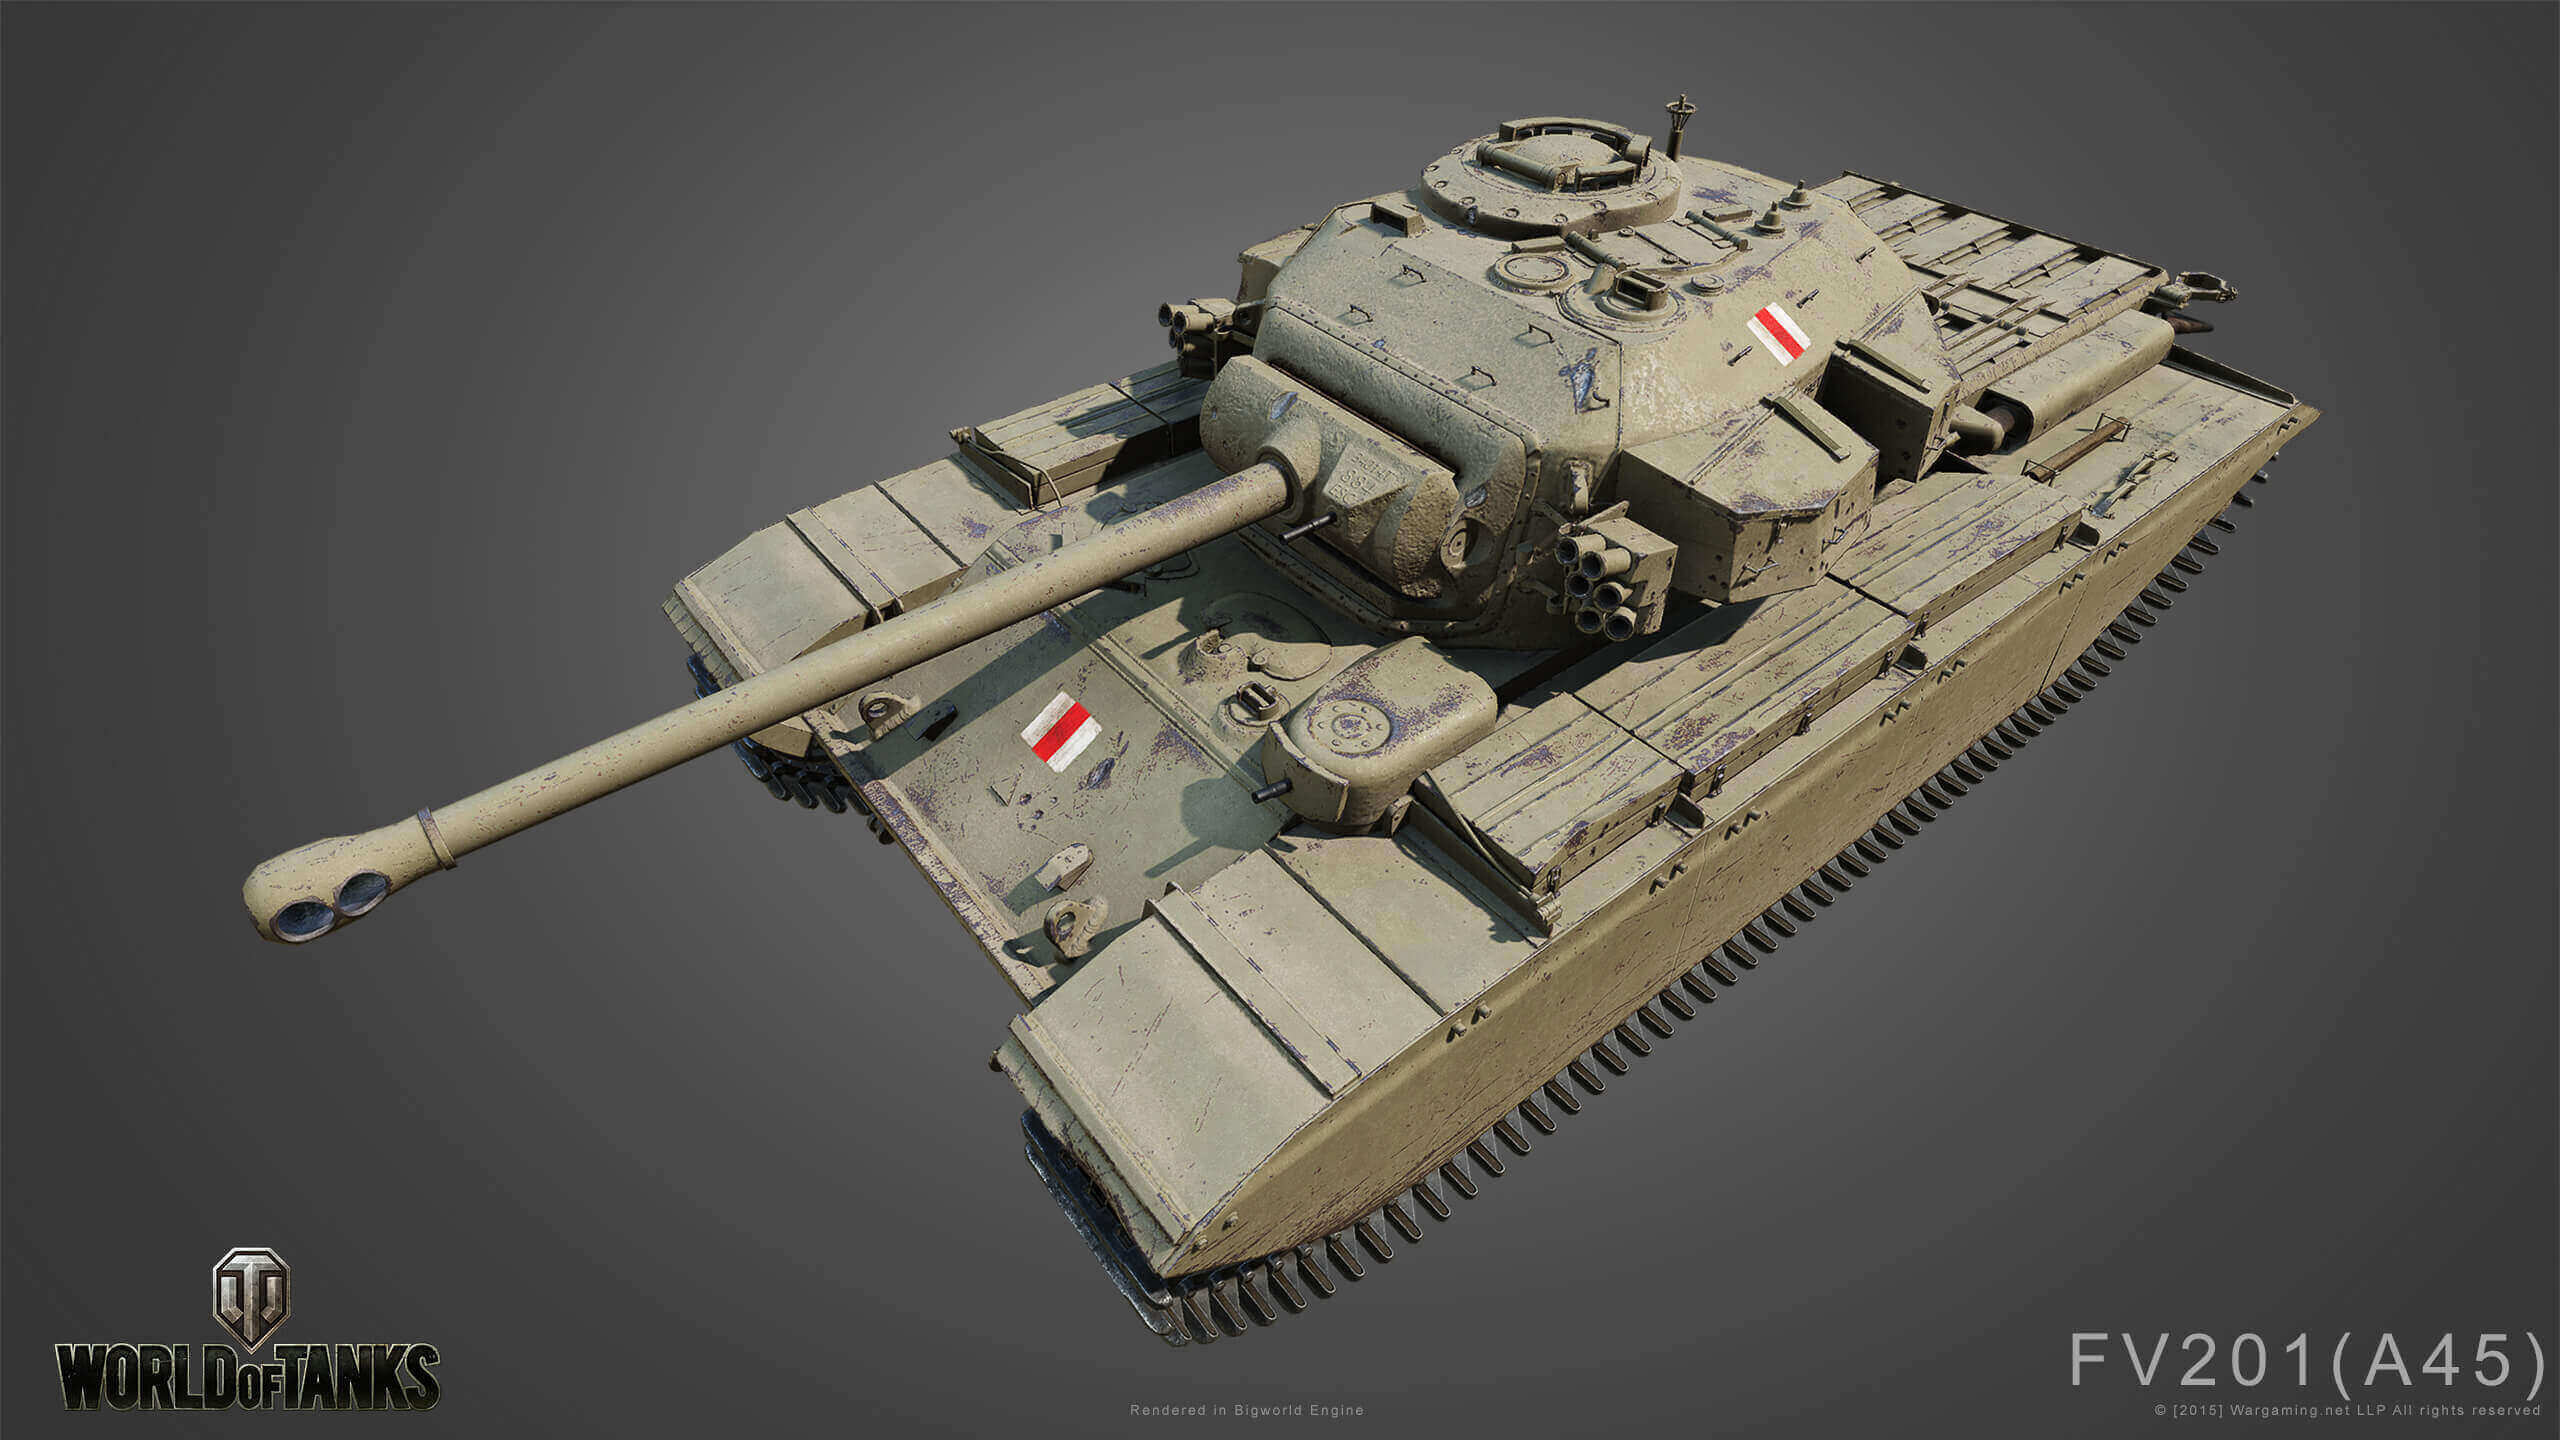 Premium Shop Collector S Gem Of The Week Fv1 5 In Game Events News World Of Tanks World Of Tanks